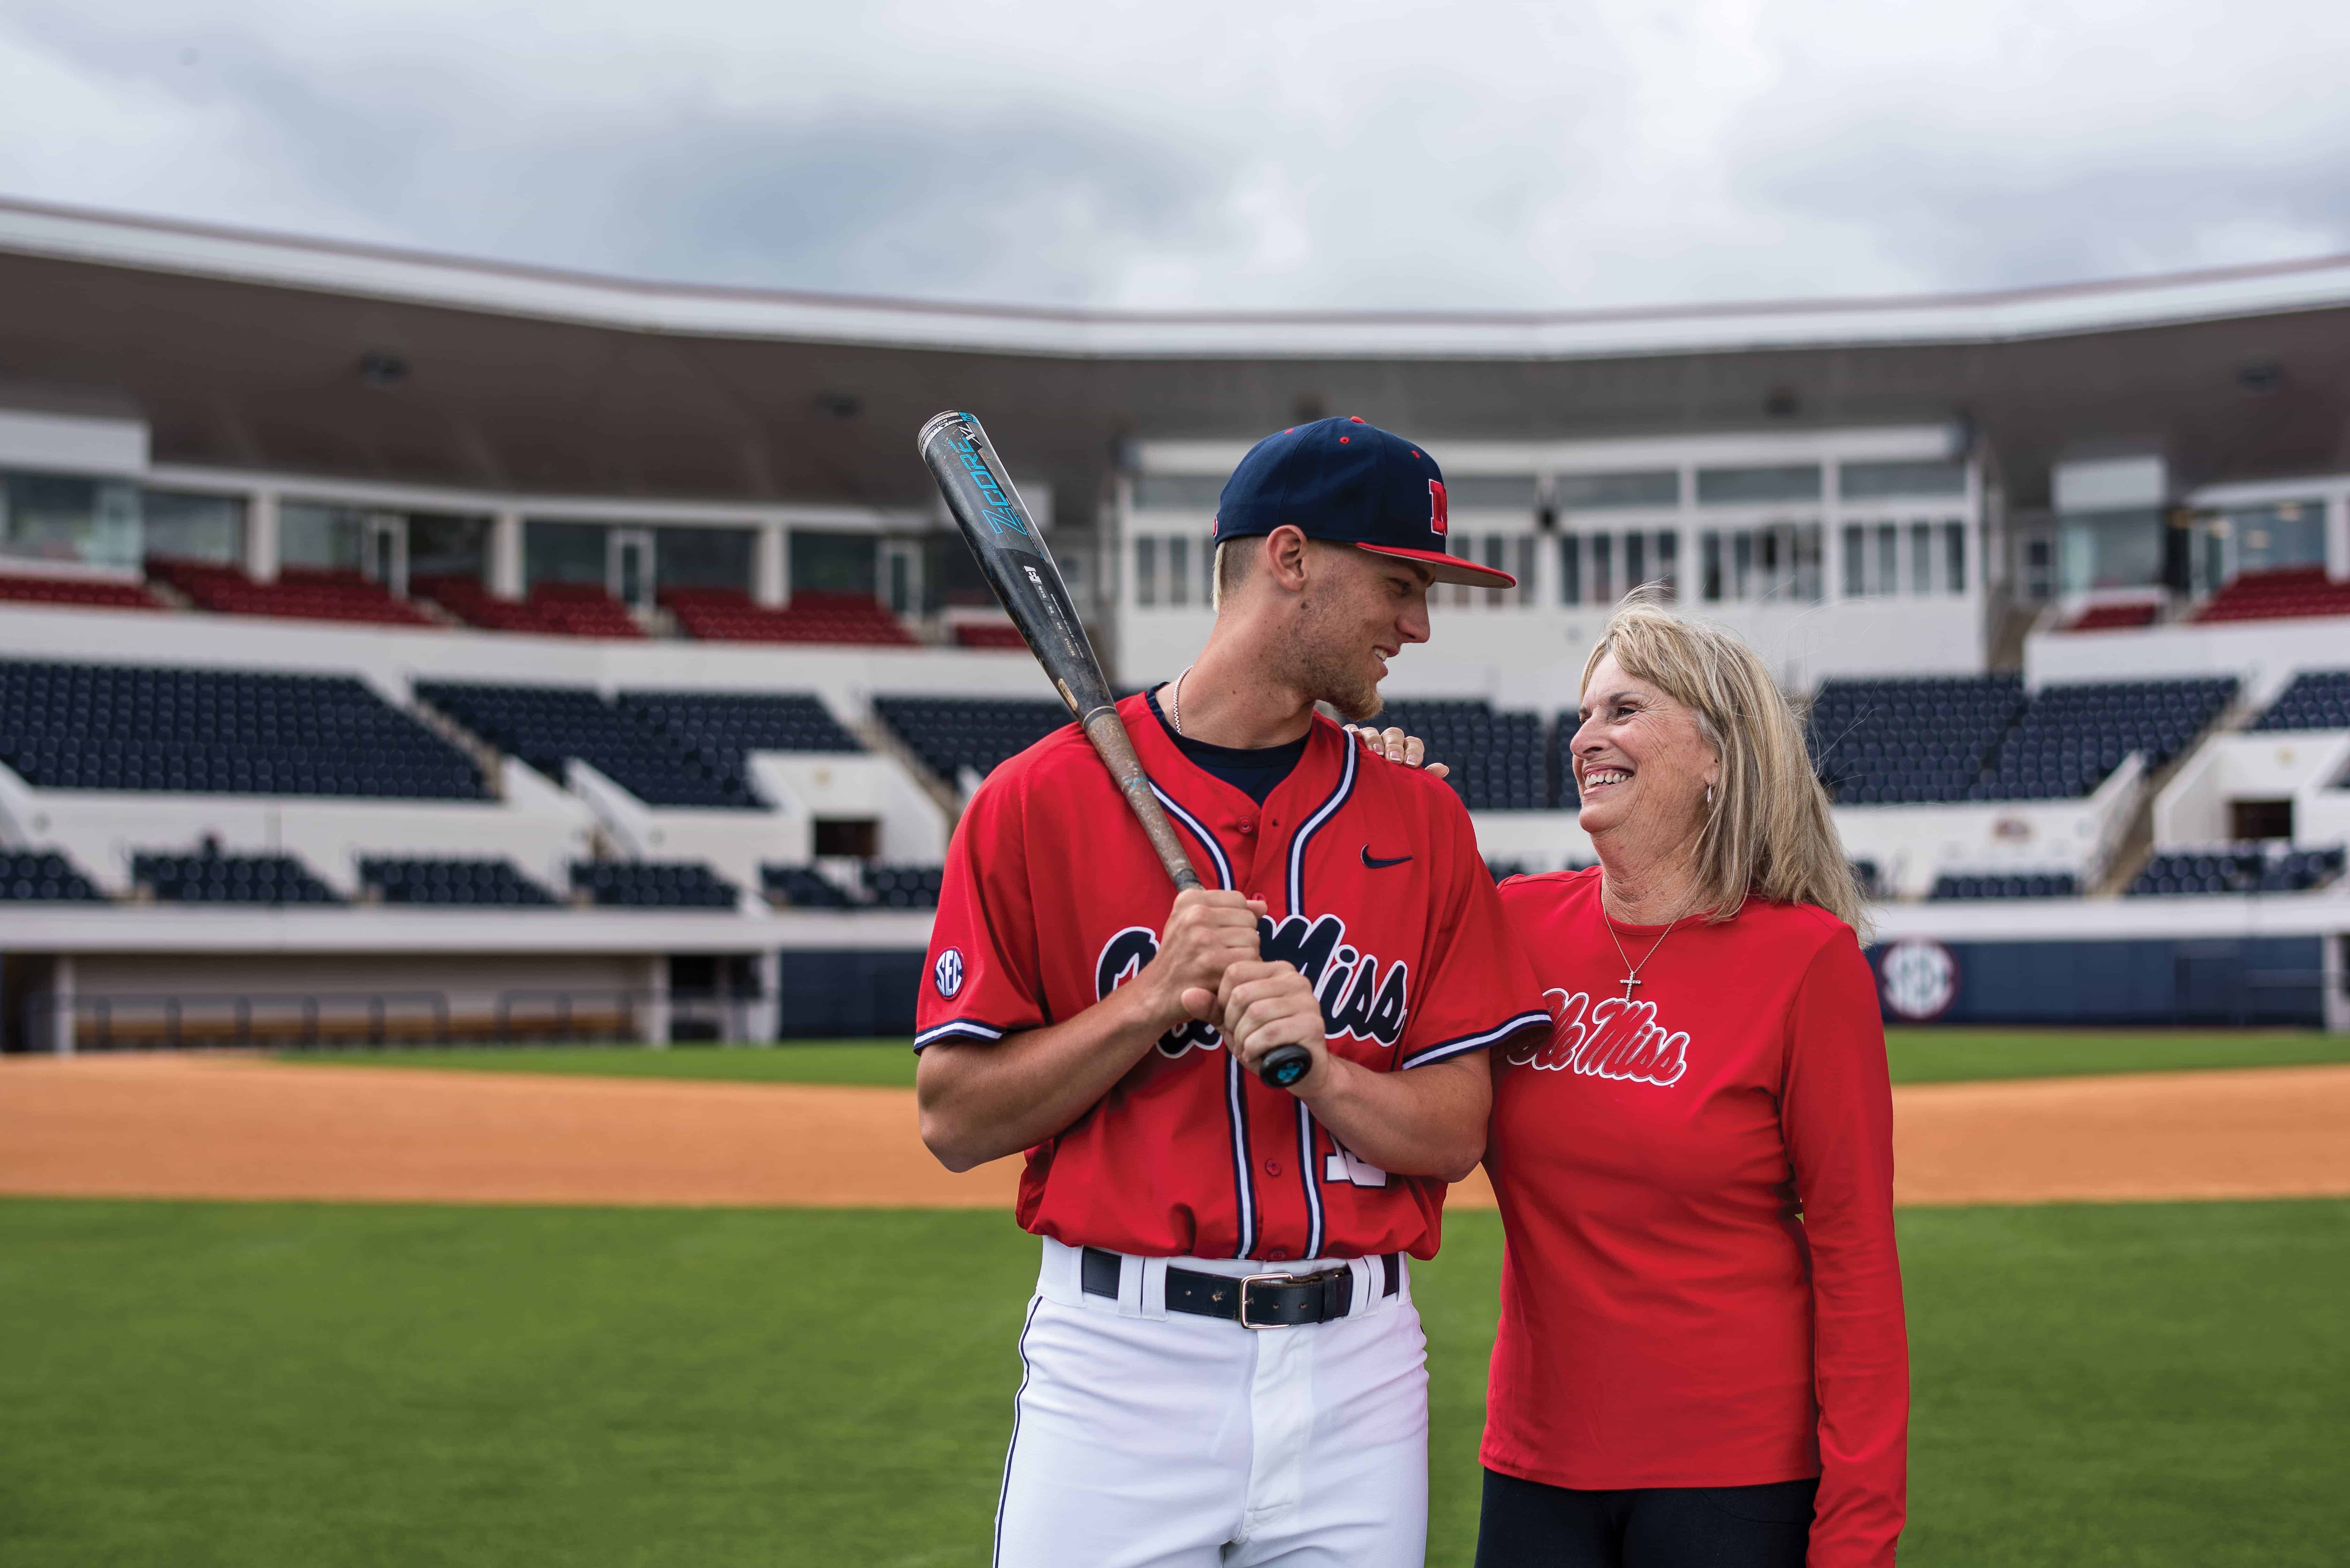 Why Carolyn Kessinger is the undisputed queen of Ole Miss baseball